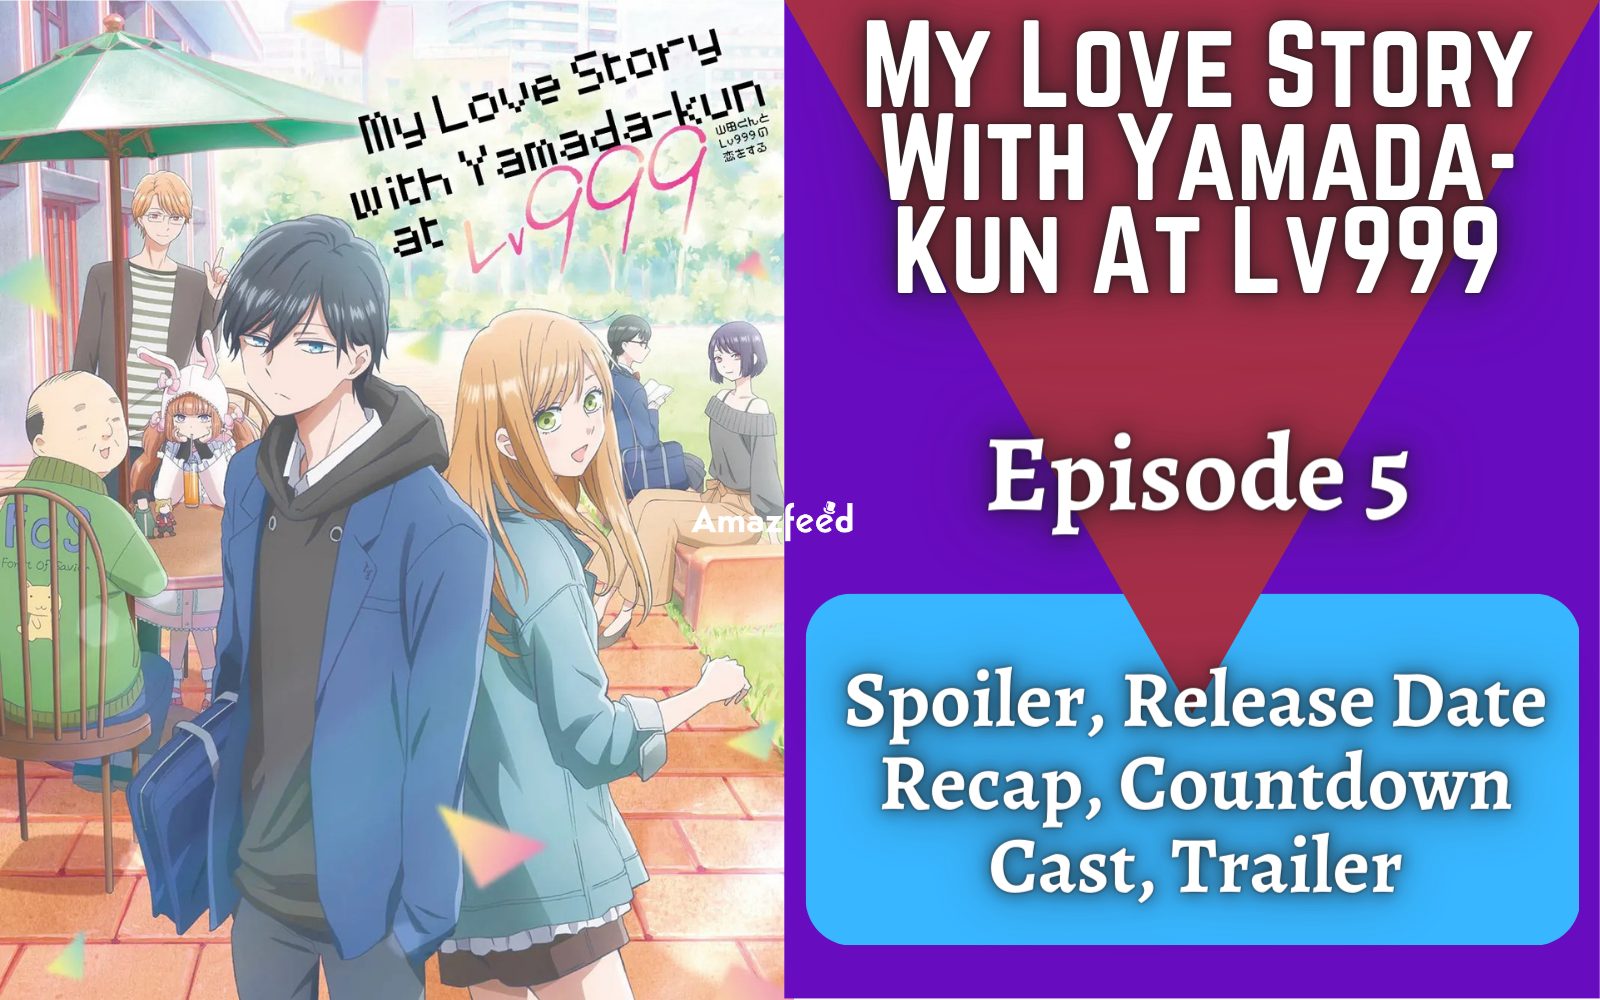 My Love Story with Yamada-kun at Lv999 episode 4 release date, where to  watch, what to expect, countdown, and more